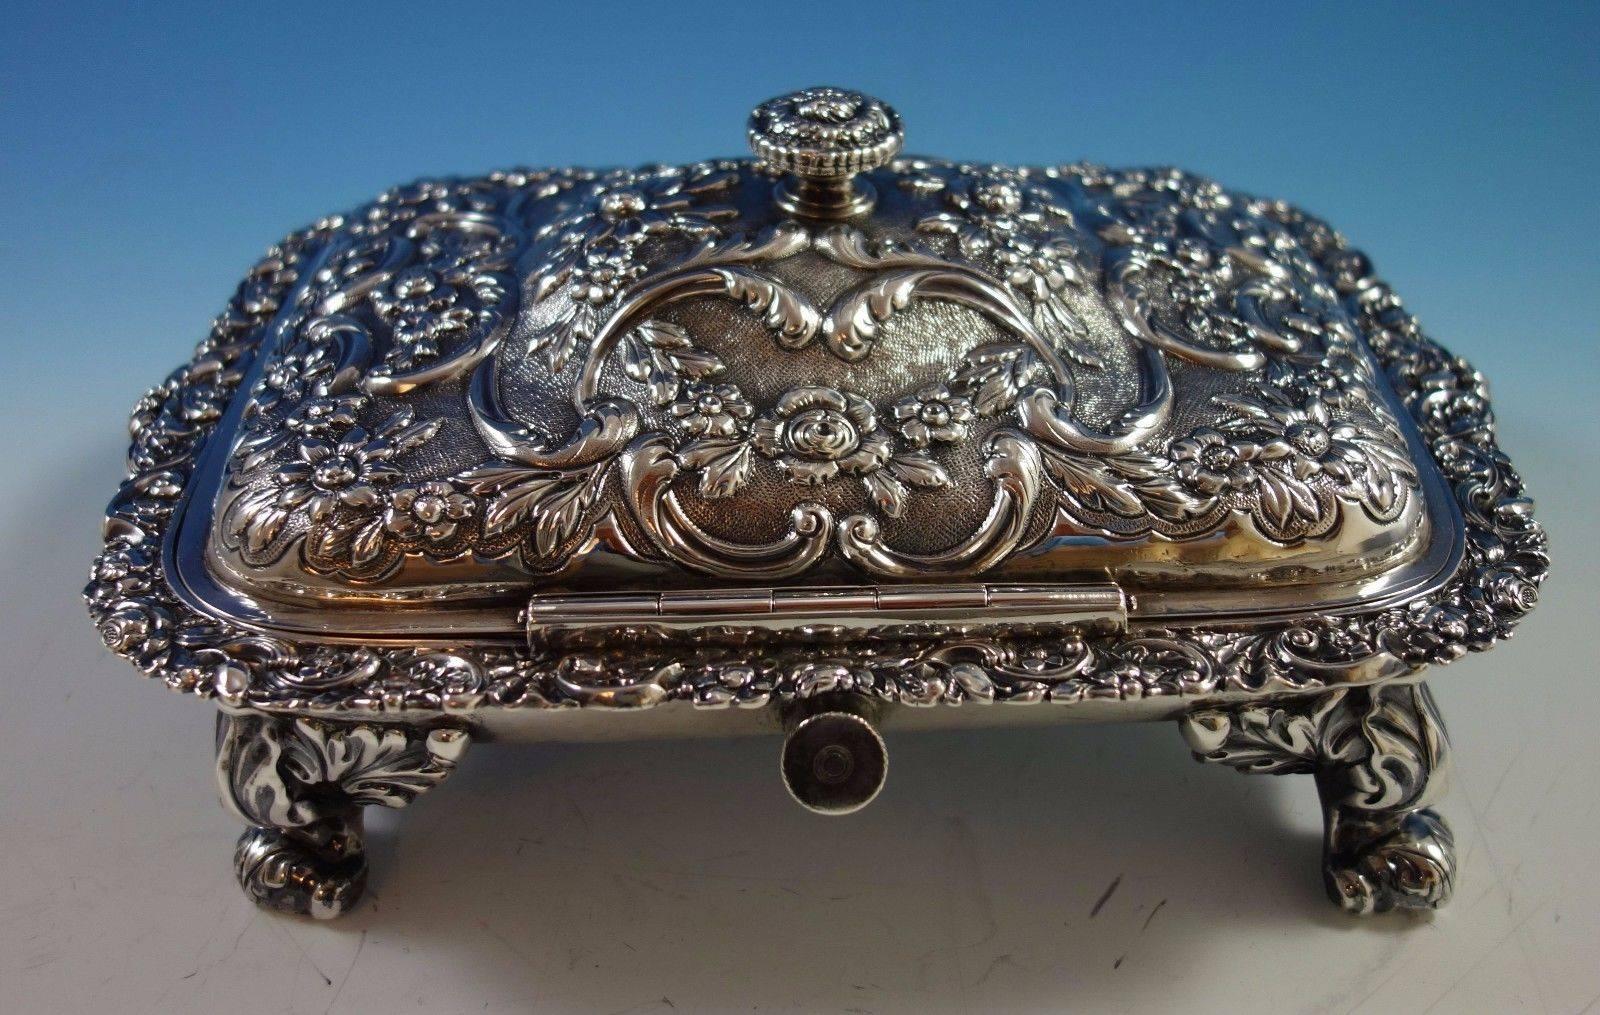 Repousse by Alexander Edmonstoun III:
Gorgeous repousse sterling silver footed dish aka Scottish cheese warmer (Brie) made by Alexander Edmonstoun III. This dish is not monogrammed and features a hinged lid, a spigot for hot water, and a beautiful